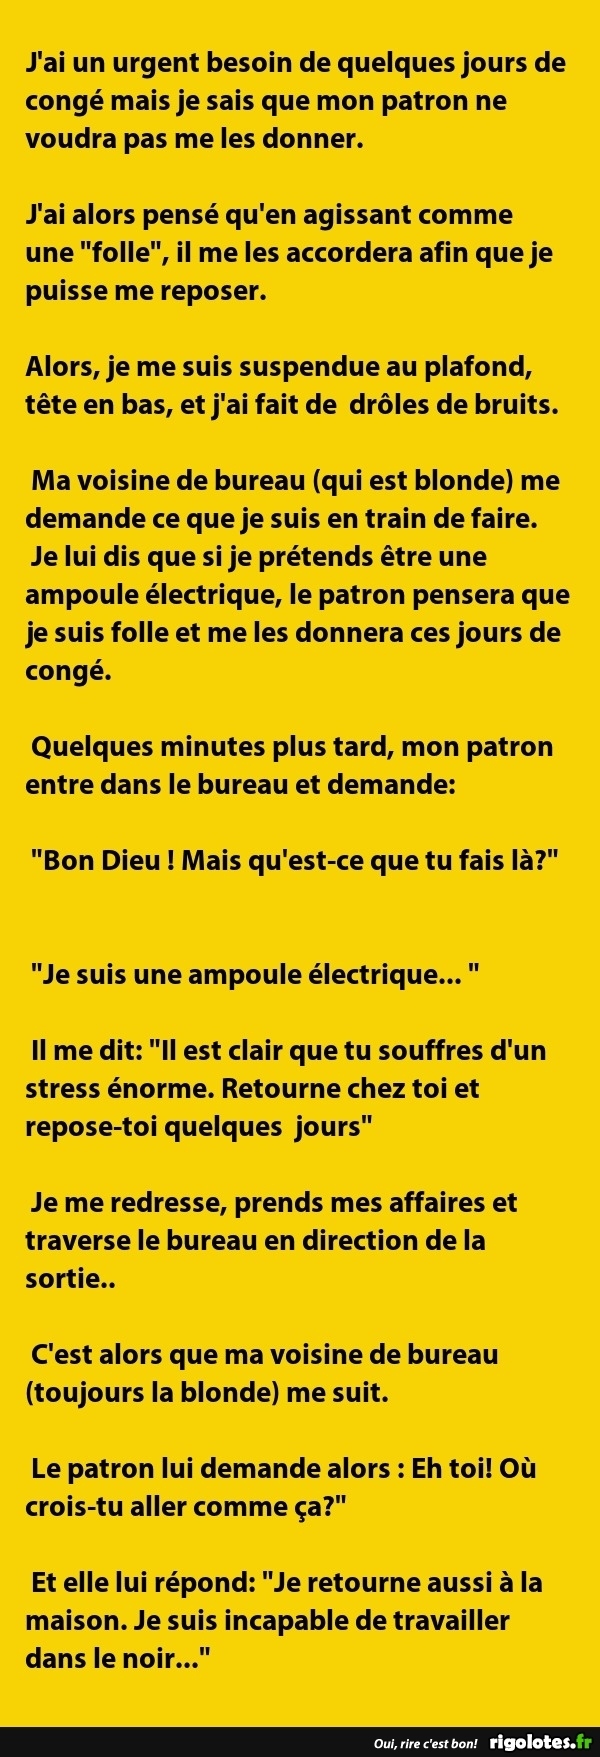 humour - Page 5 20181104